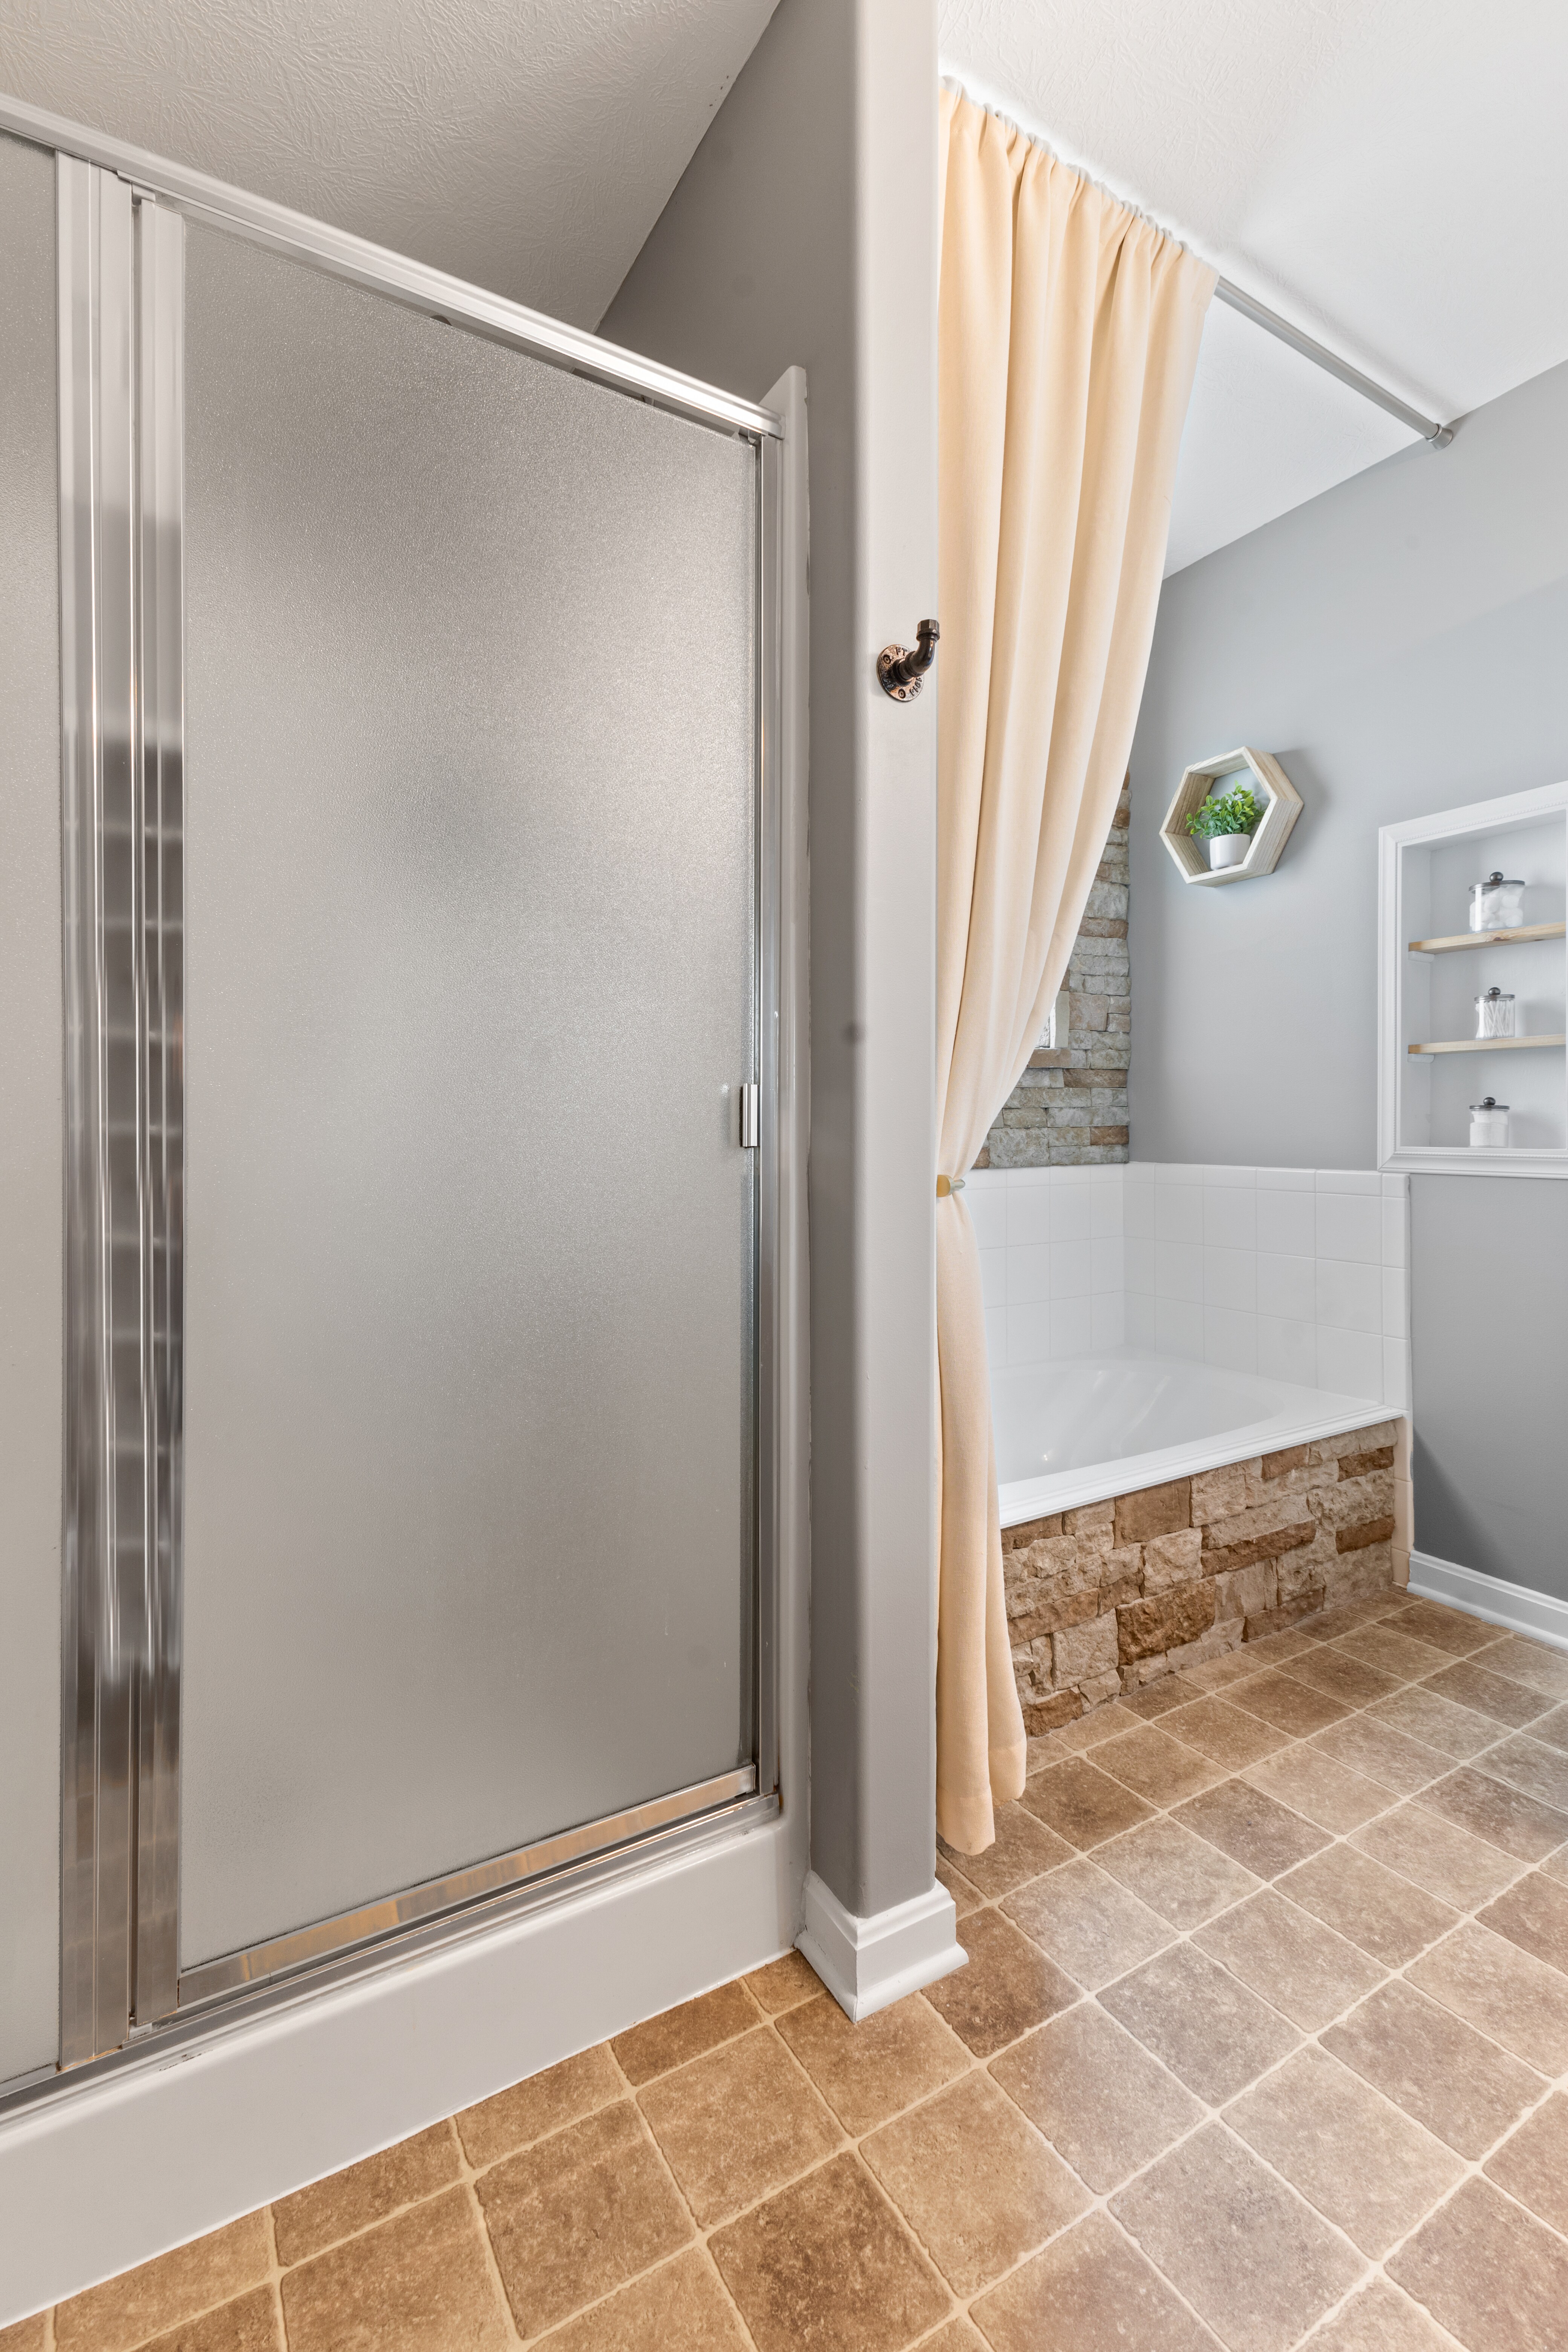 Chic bathroom features a frosted glass shower